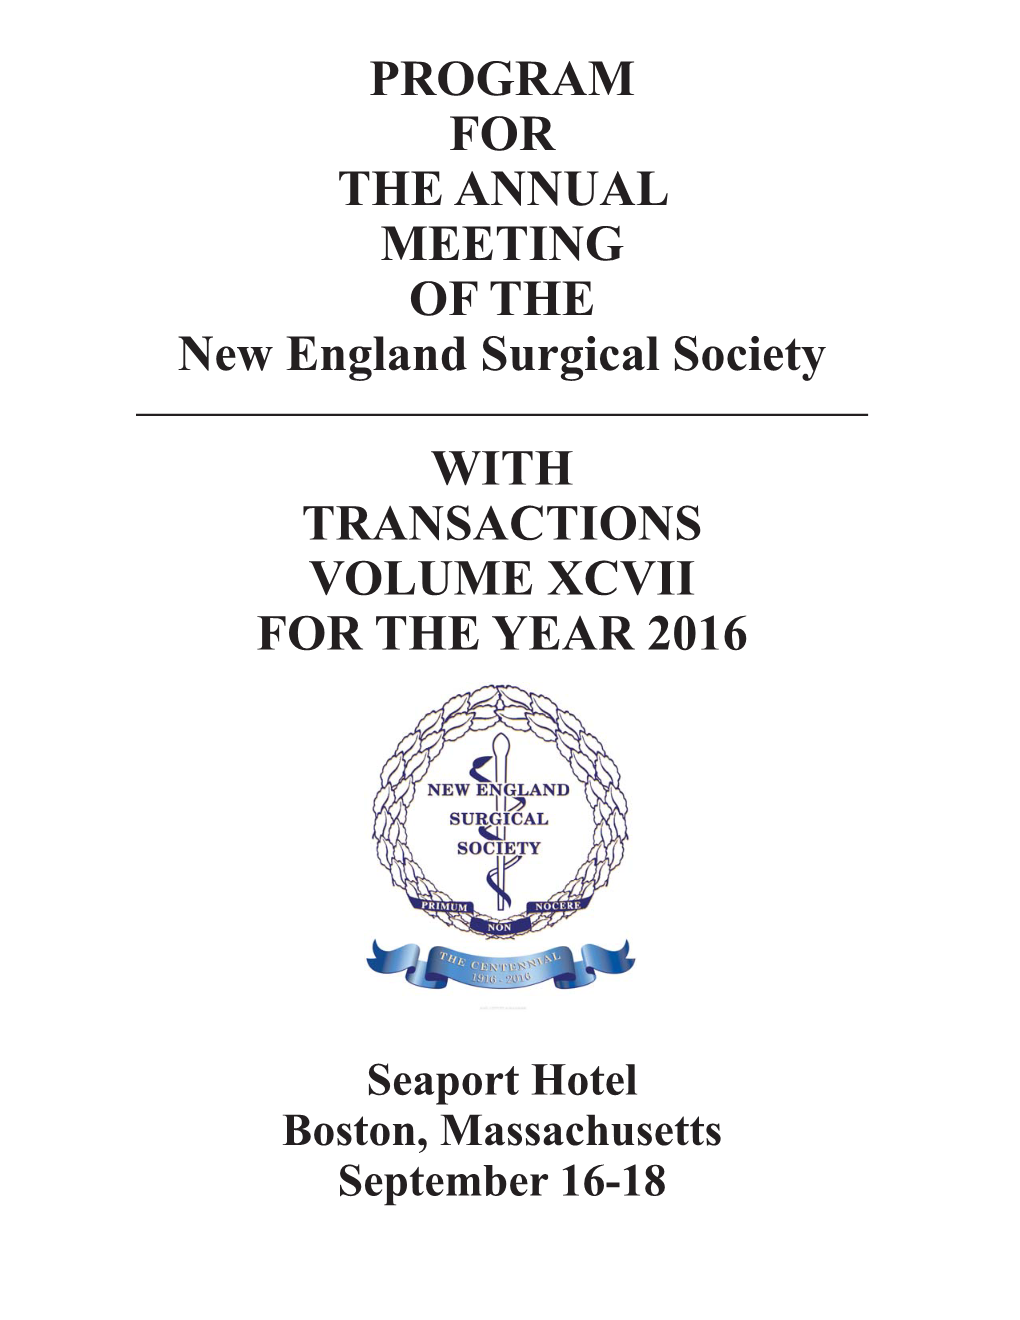 PROGRAM for the ANNUAL MEETING of the New England Surgical Society